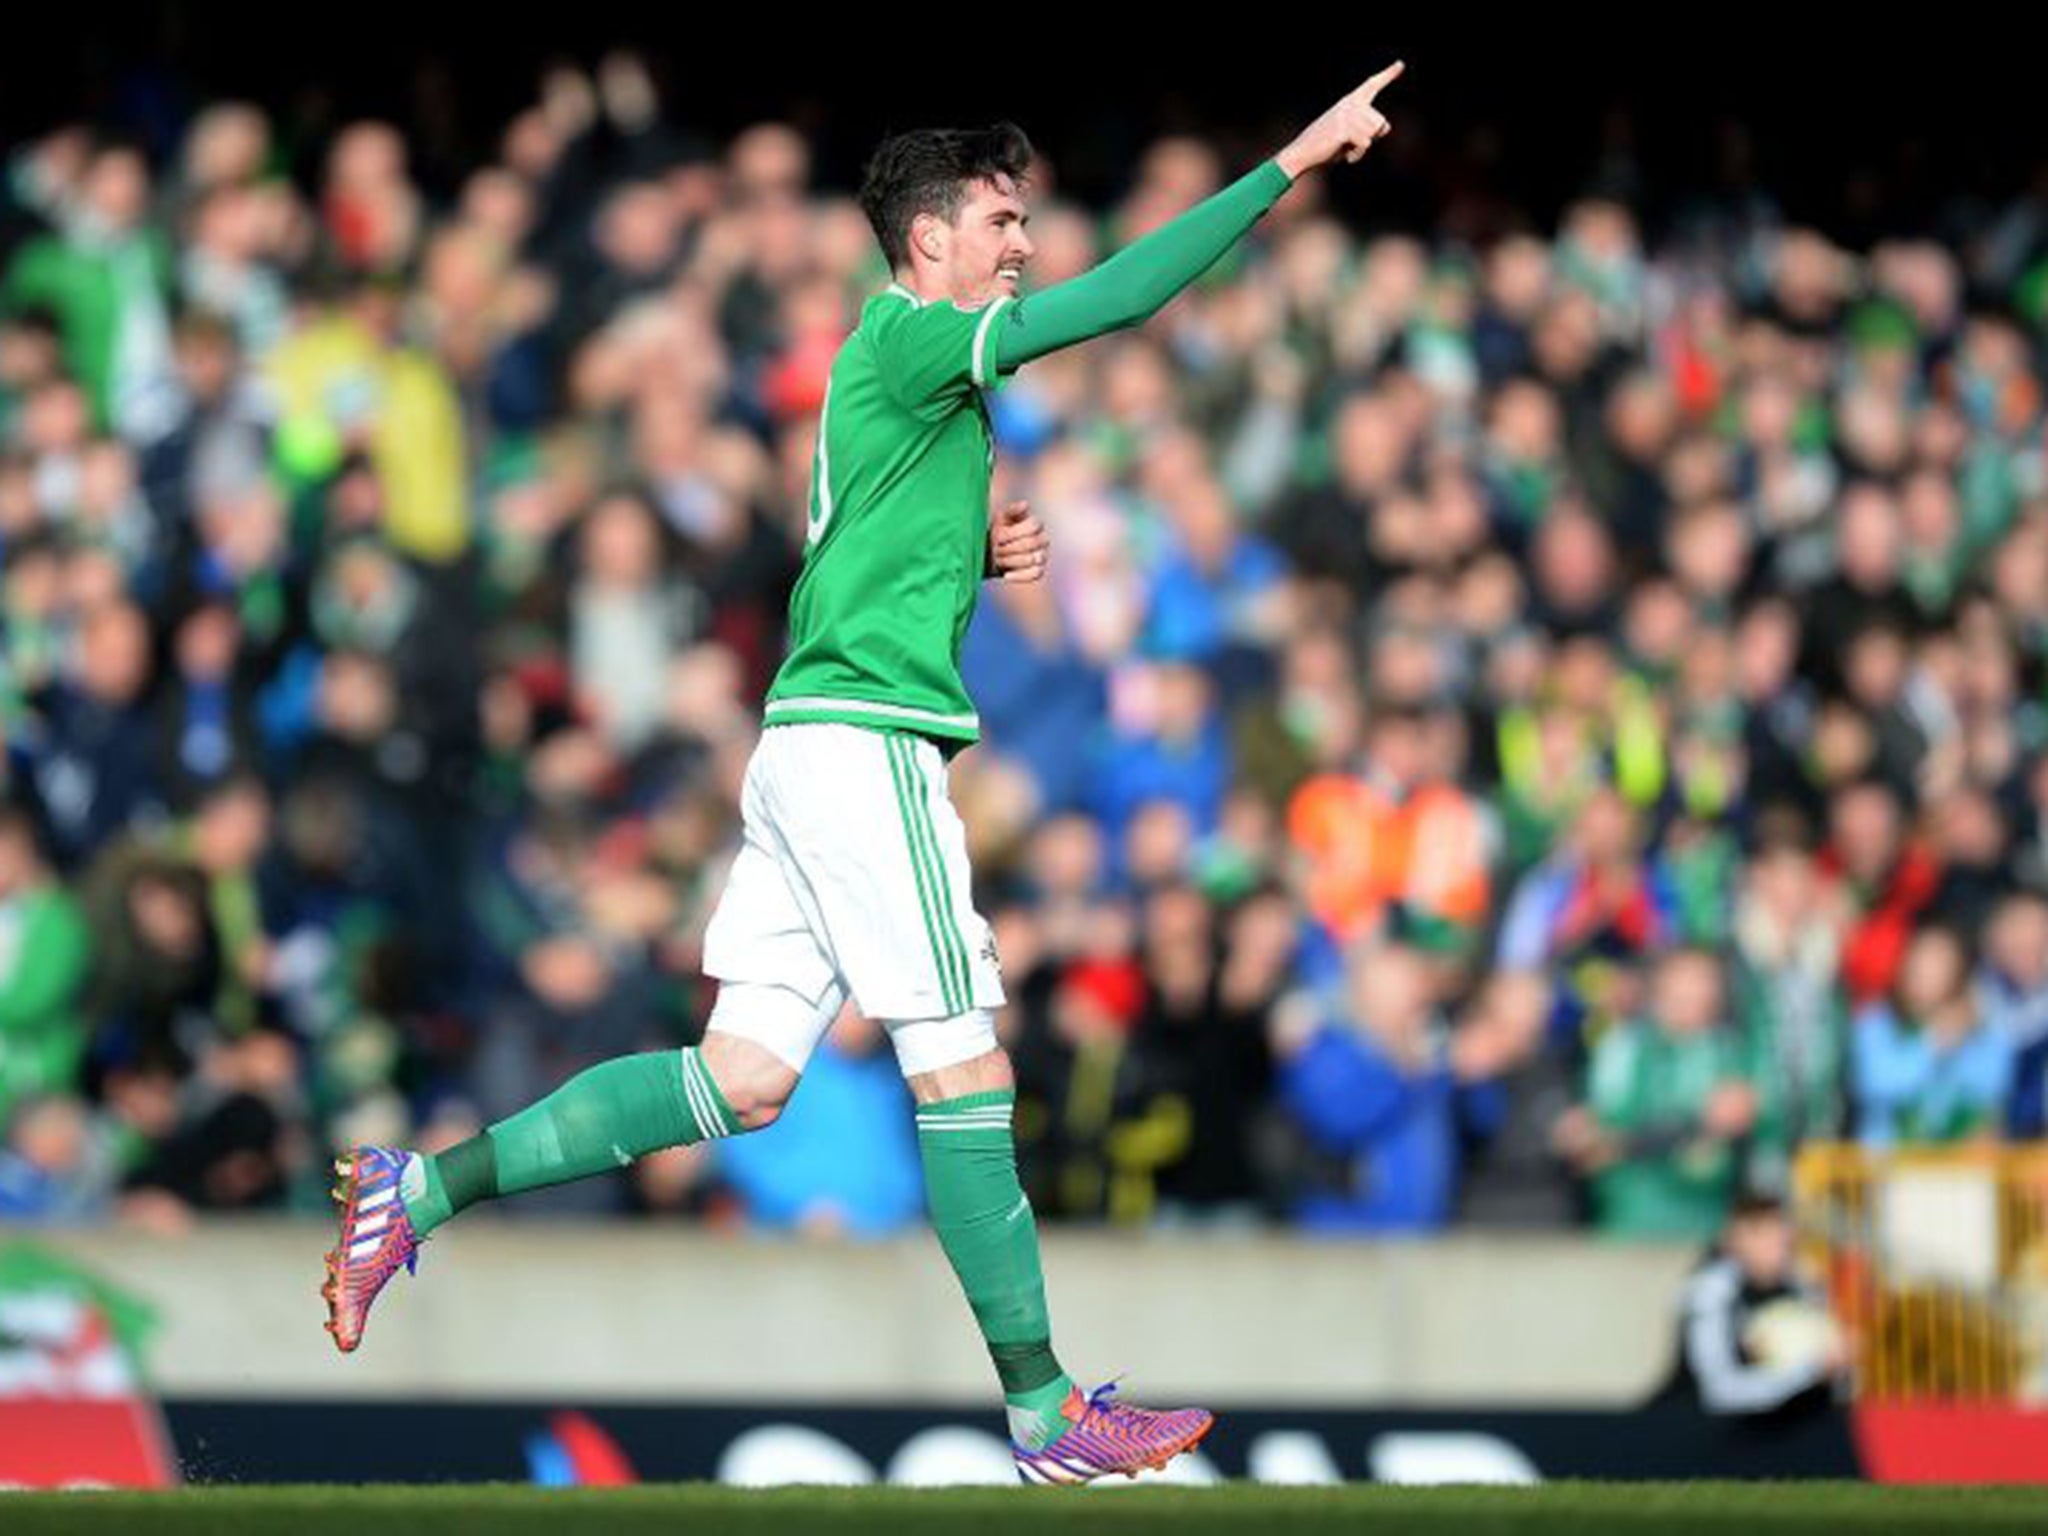 Kyle Lafferty has scored five goals in qualifying